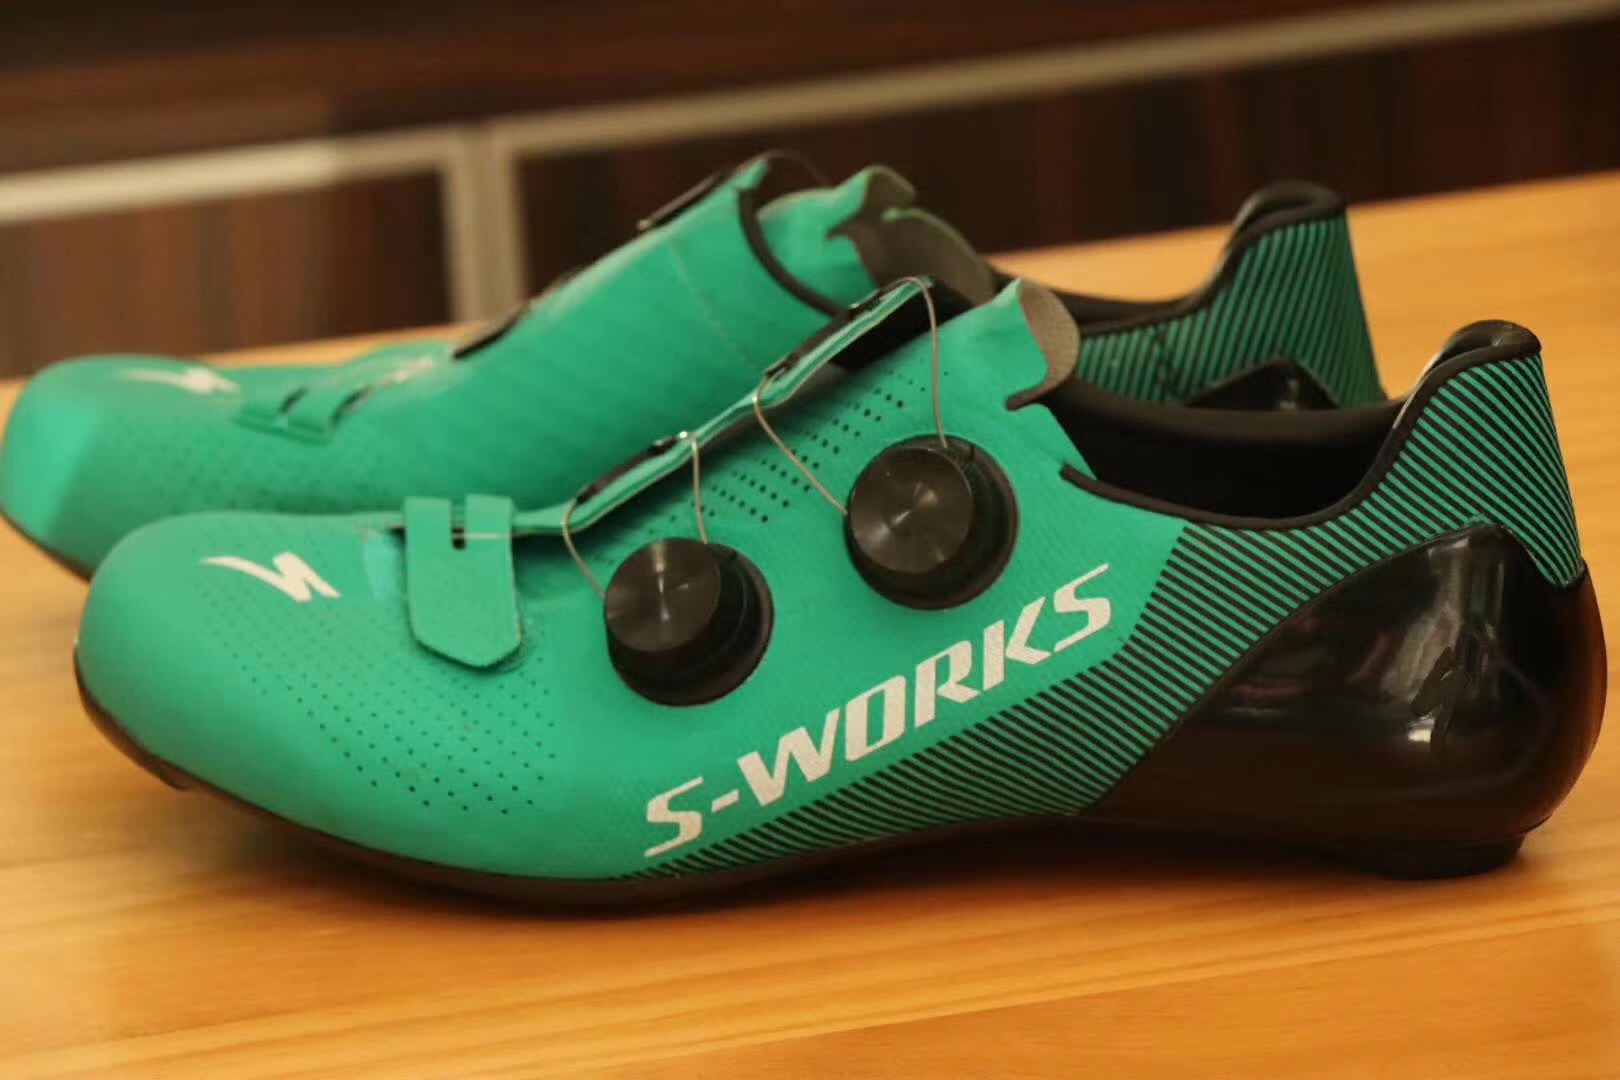 specialized s works shoes for sale